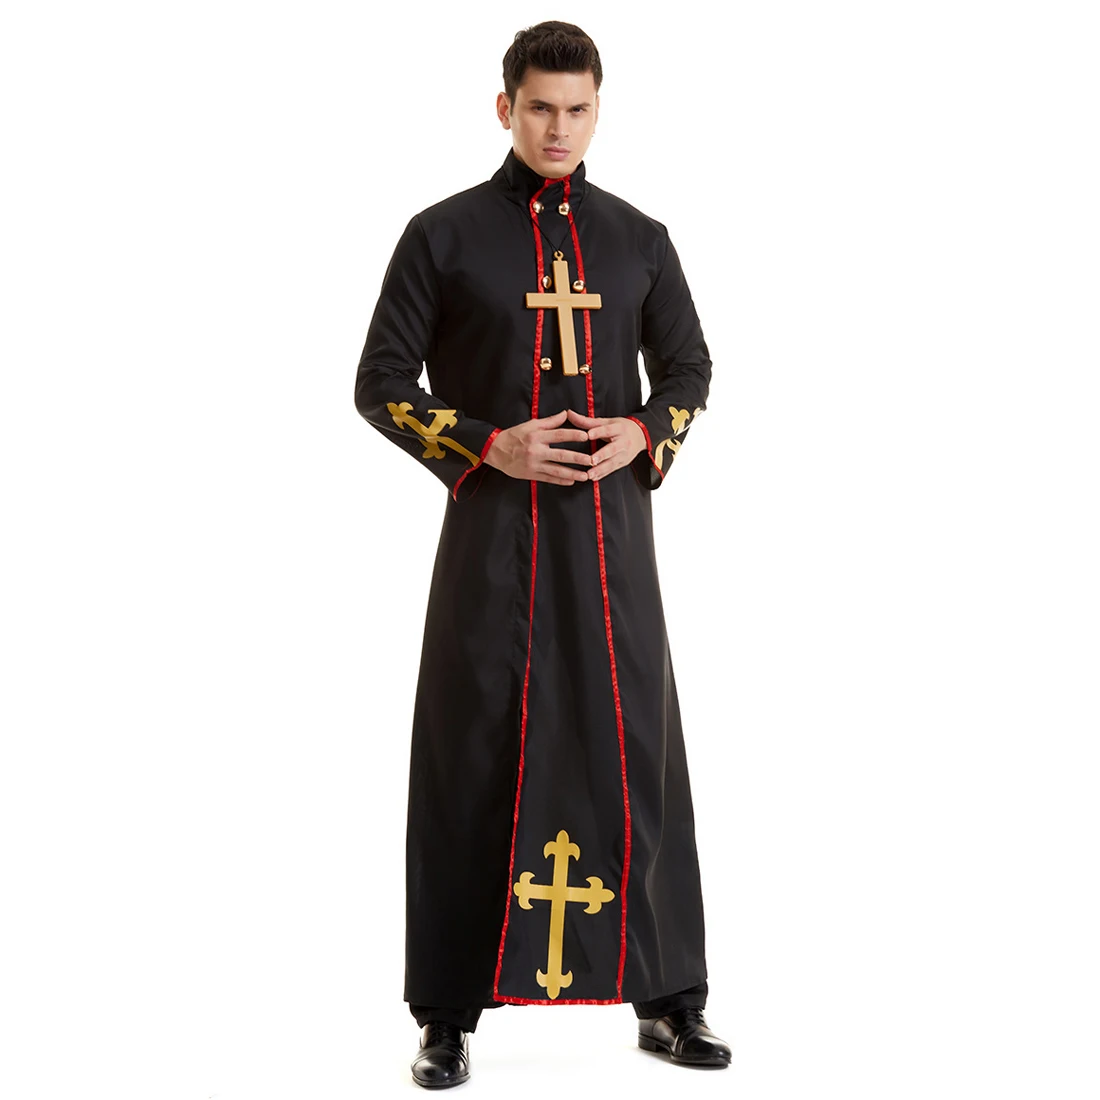 Umorden Adult Men Evil Priest Costumes Minister Of Death Costume Cosplay Halloween Purim Party Fancy Dress